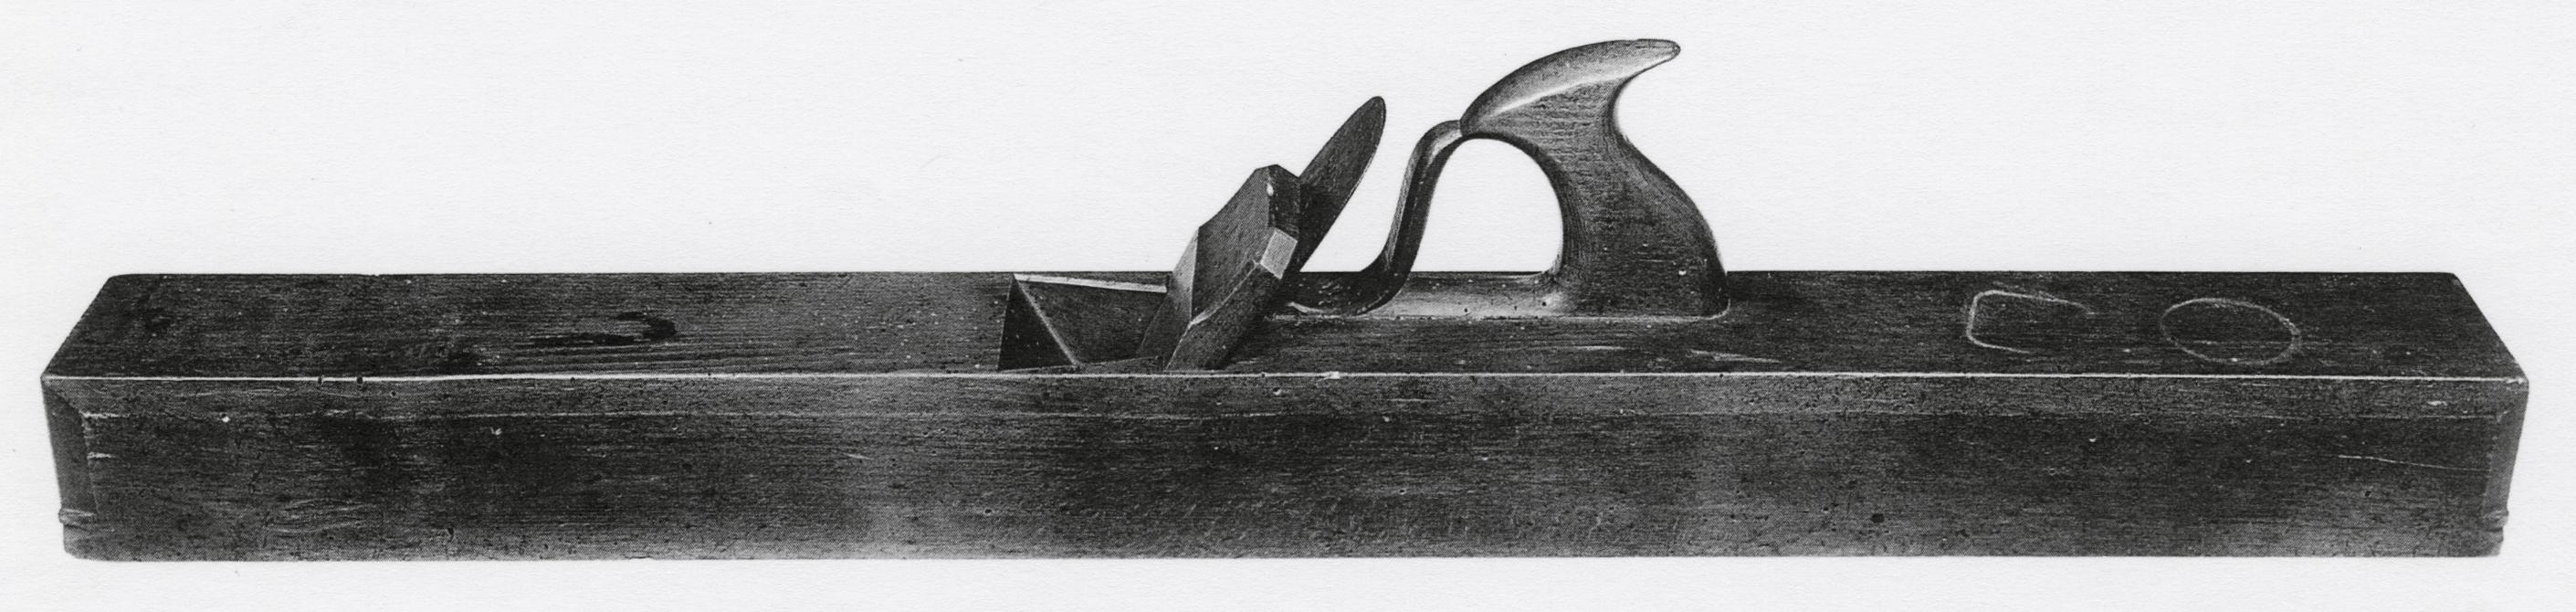 Black and white photograph of a jointer plane.